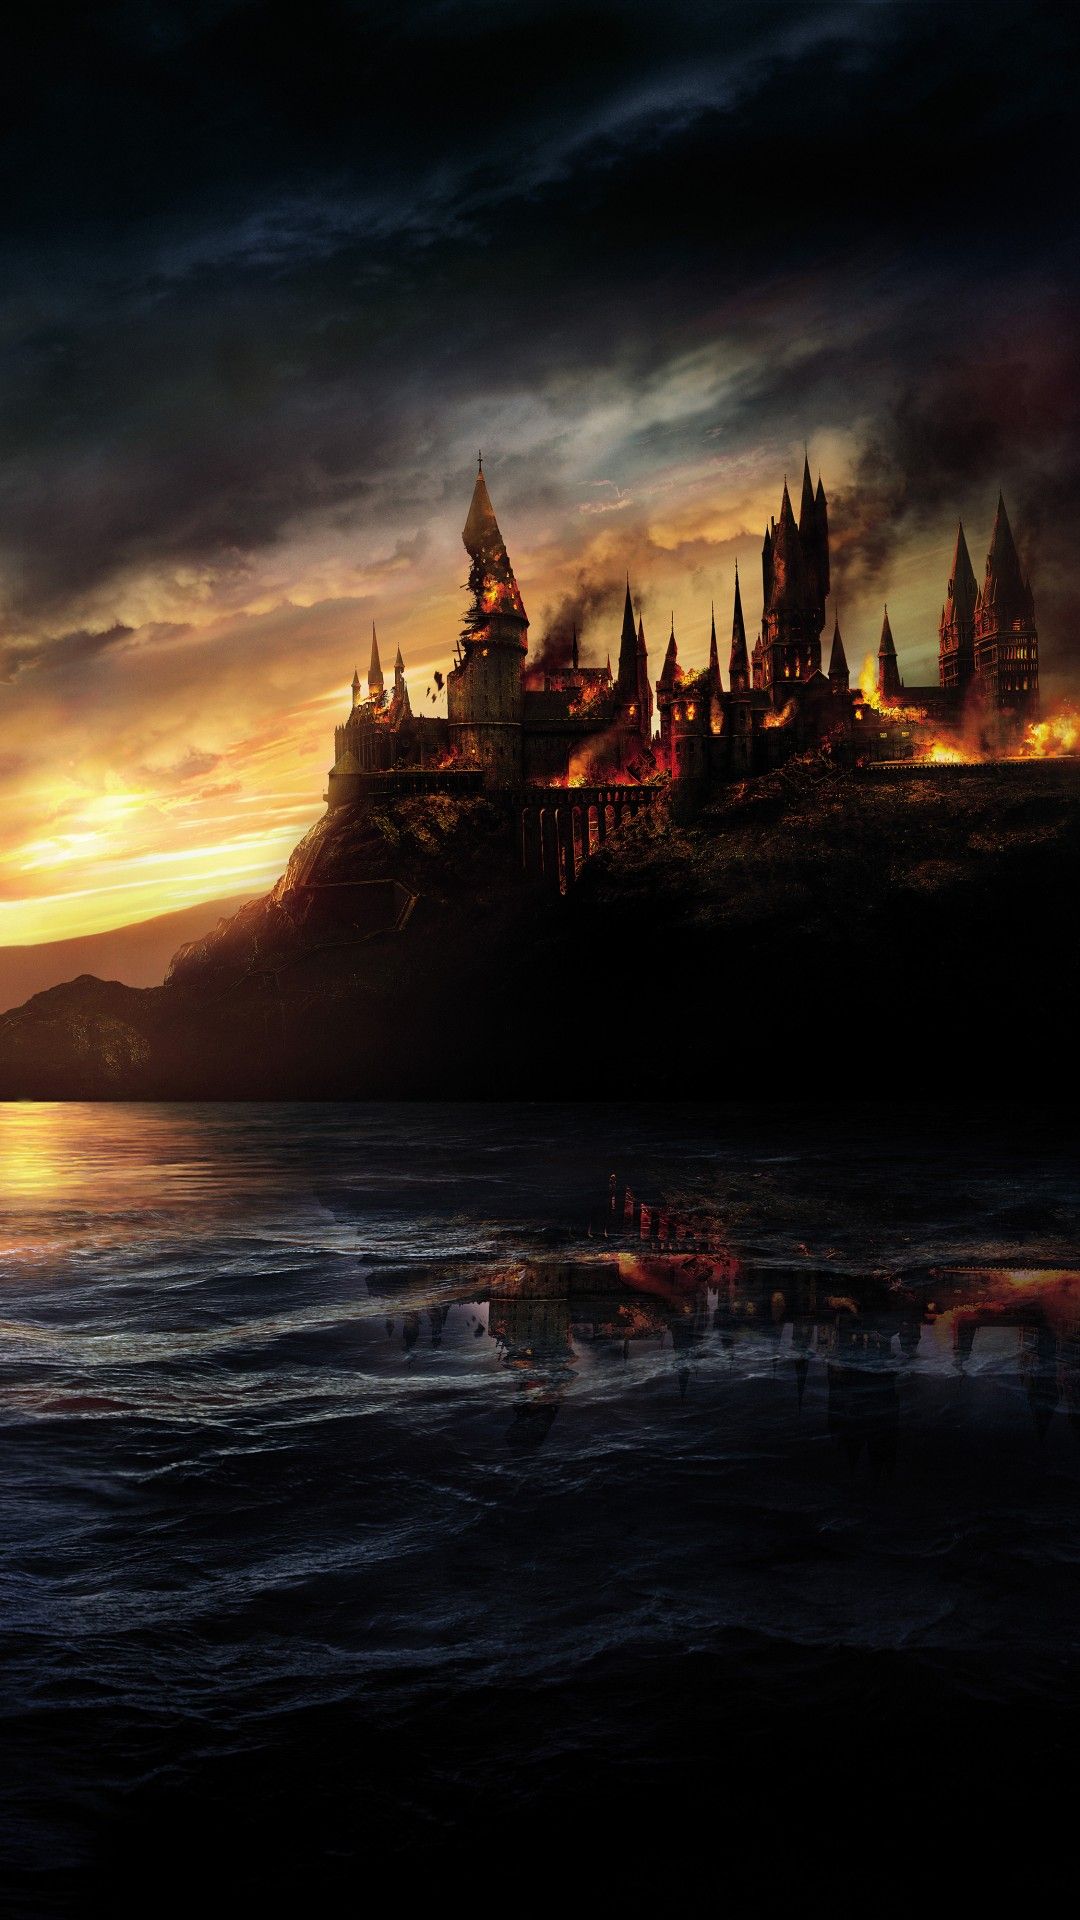 Wallpaper Hogwarts, Burning, Harry Potter and the Deathly Hallows